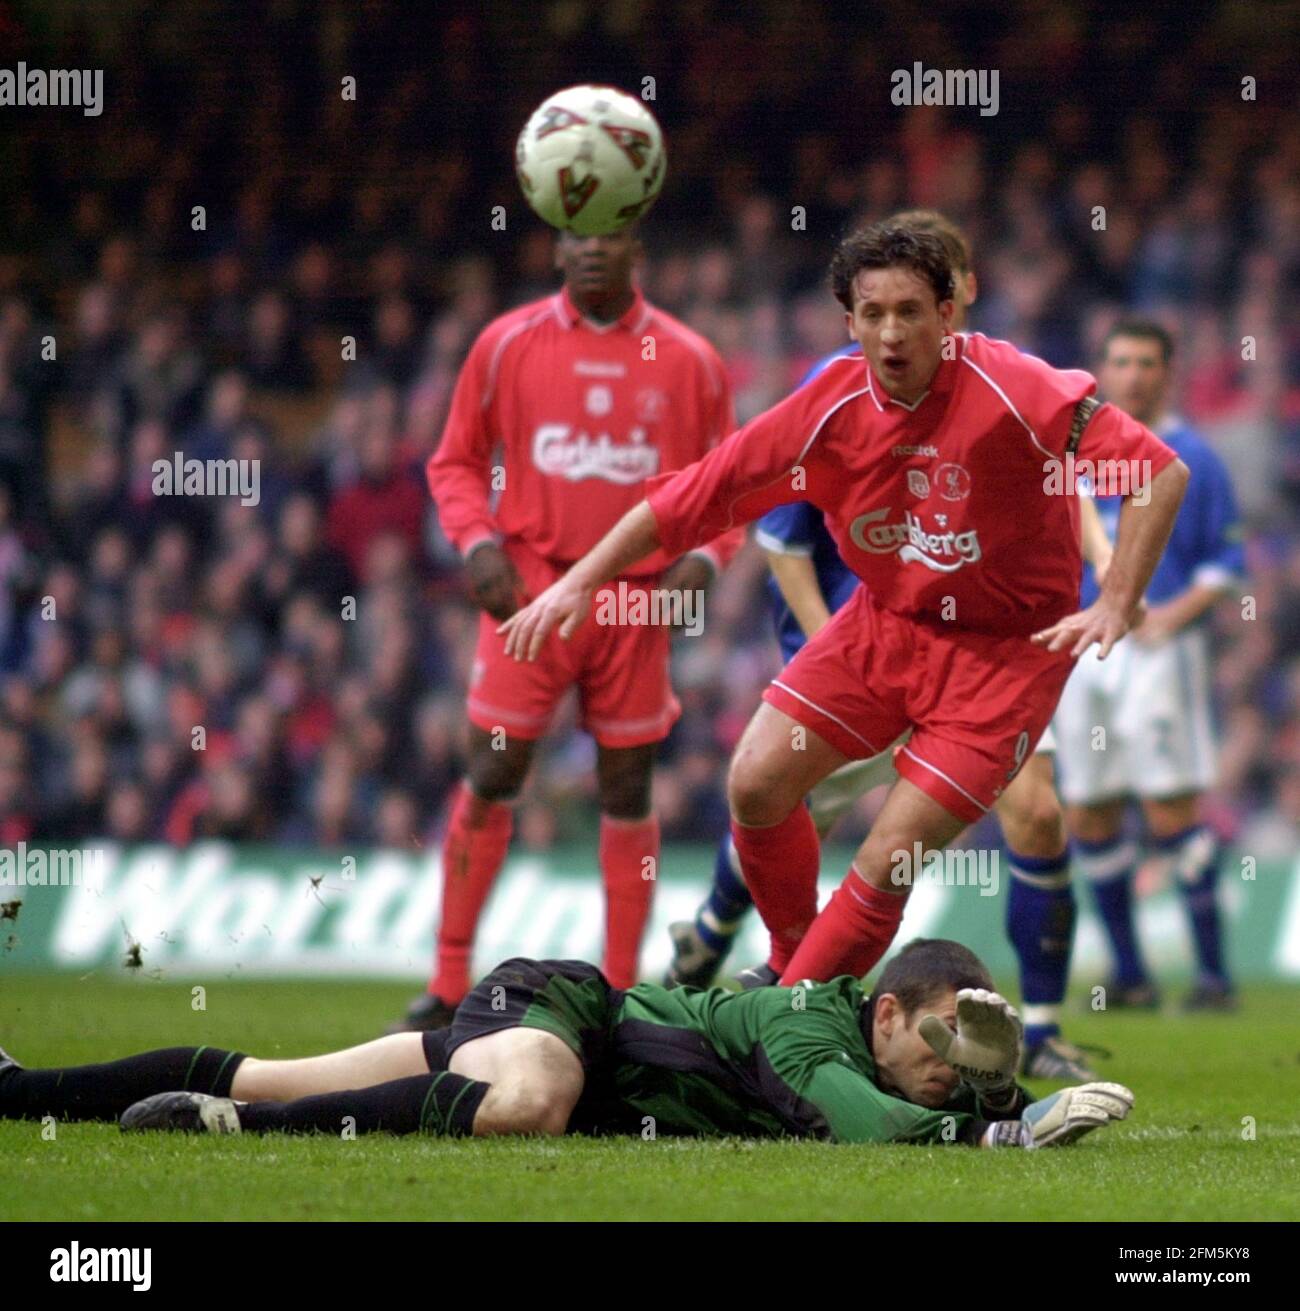 ROBBIE FOWLER IN ACTION DURING THE WORTHINGTON CUP FINAL 2001 AT THE ...